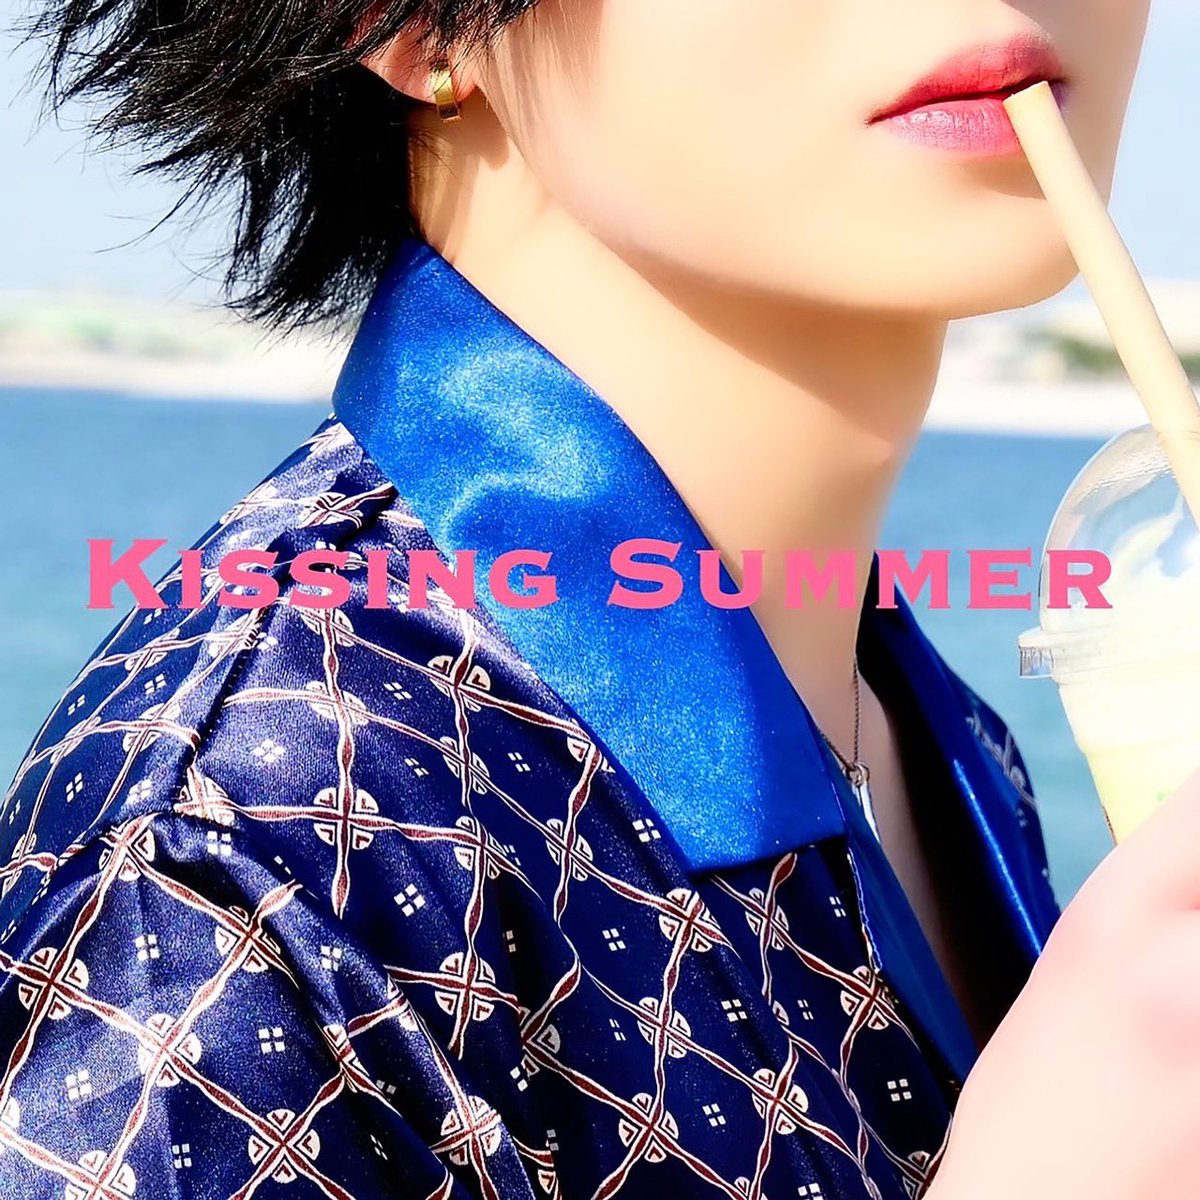 My Lonely Vacation
Kissing Summer 

Relese at Subs.

6/4 21:00- 
The MV will be relesed at YouTube.
Check it!!

#spotify #itunes #summer #music #japan #japanese #aor #80s #newage #rock #rockband #blue #citypop #portrait #lol #neo #uk #ukrock